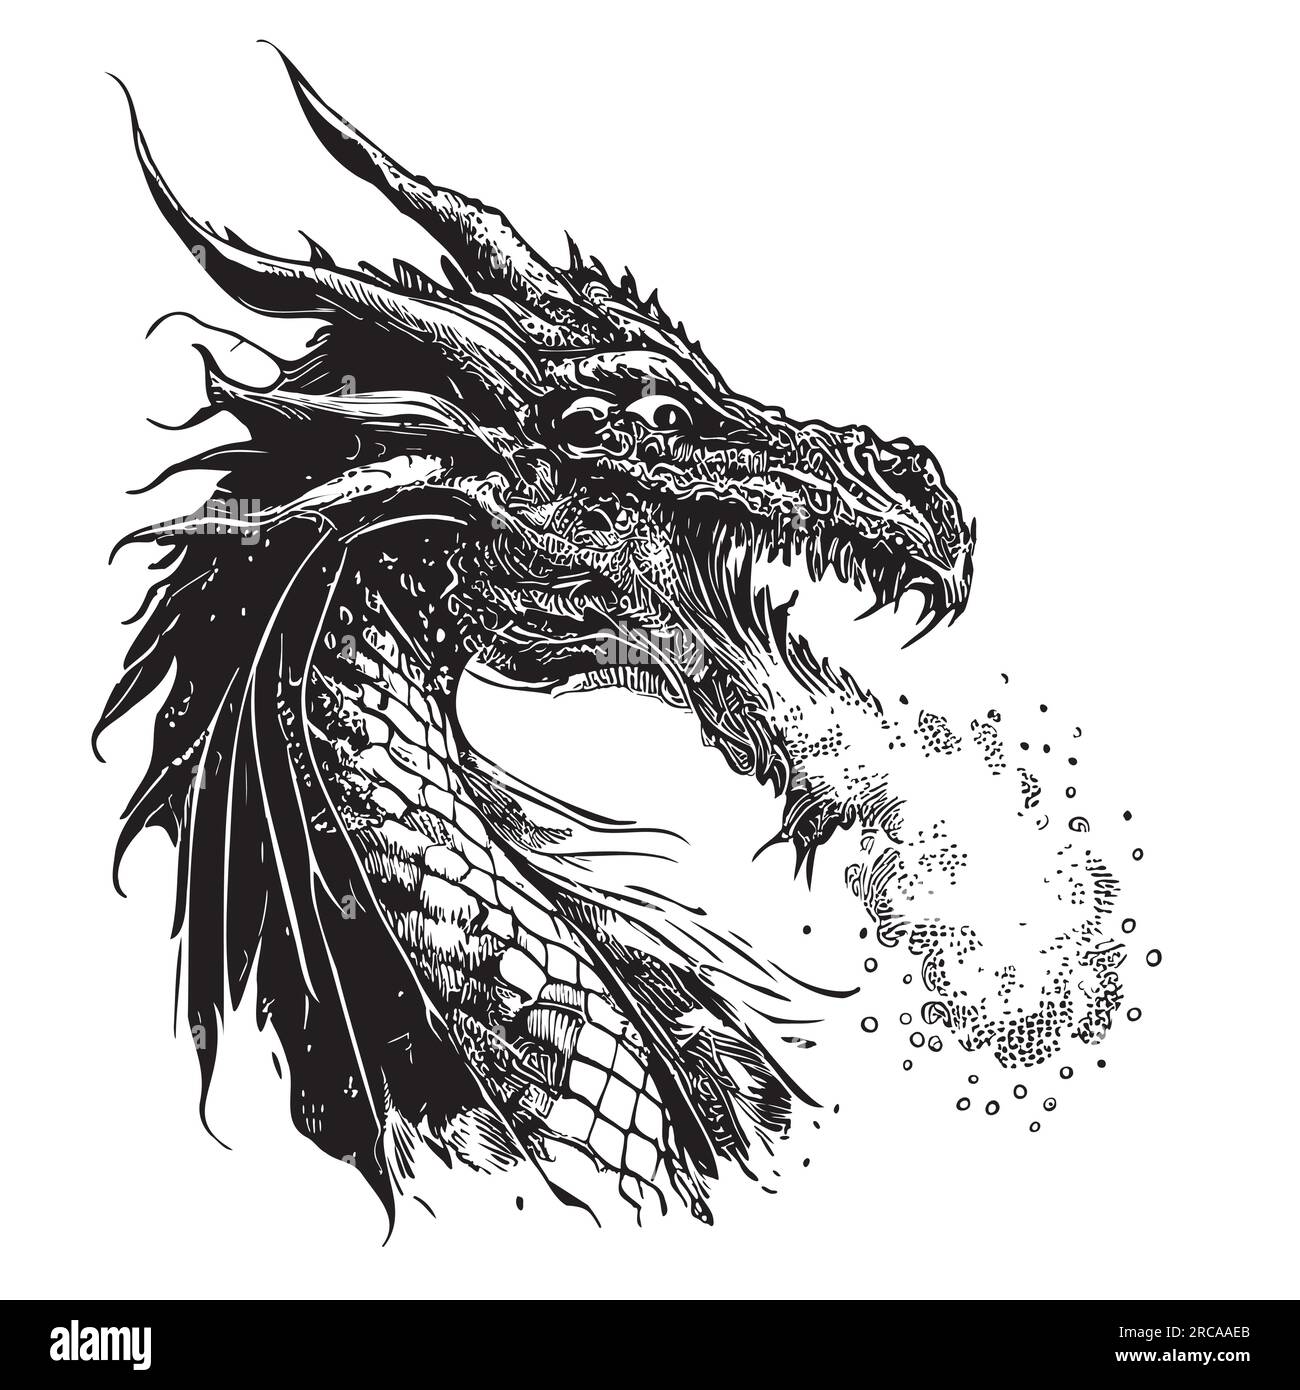 Dragon breathing fire mystical sketch drawn in doodle style illustration Stock Vector